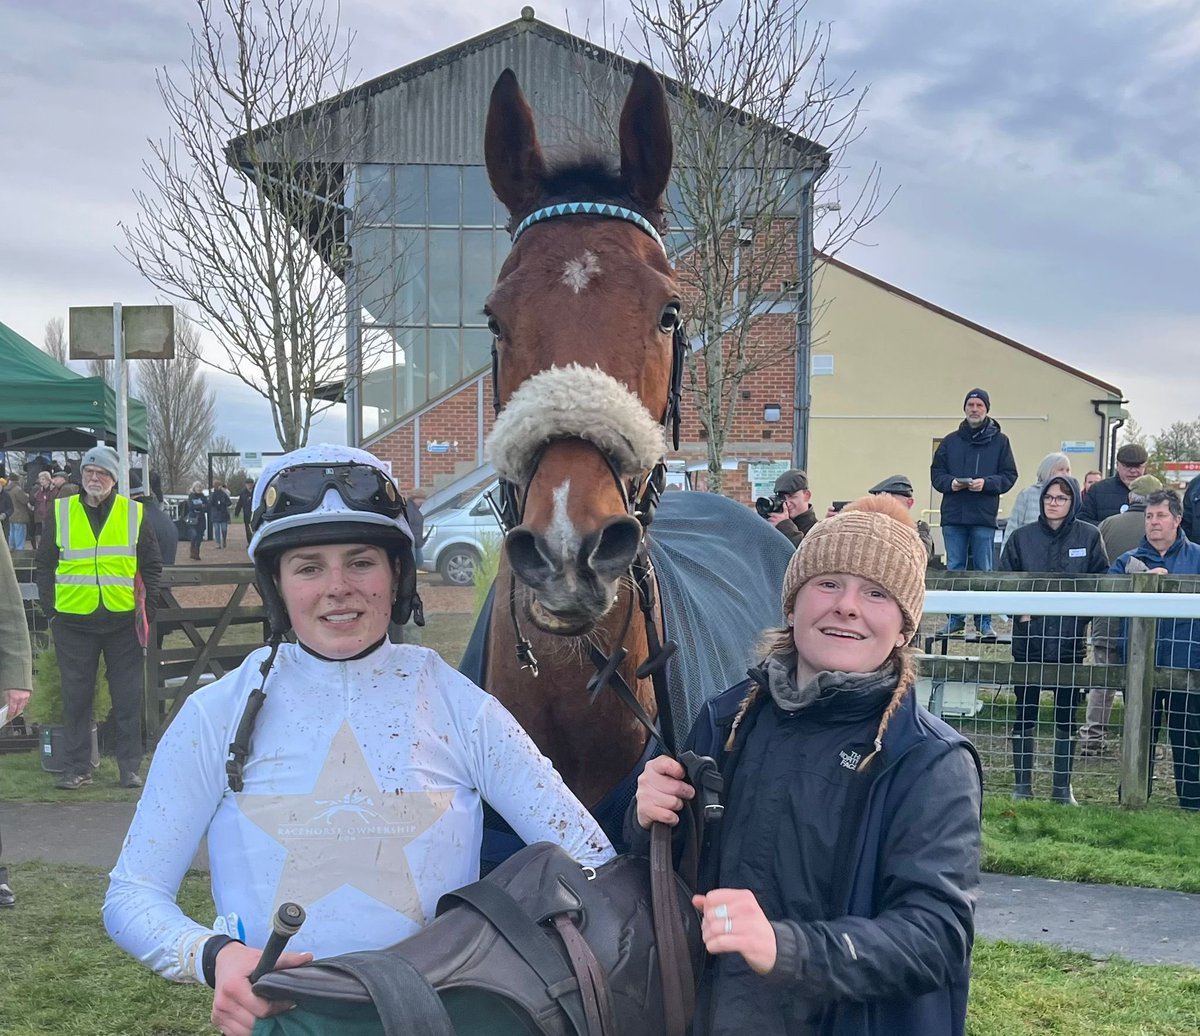 Get involved with winning National Hunt horse 𝐄𝐝𝐢𝐬𝐨𝐧 𝐊𝐞𝐧𝐭 who is running tomorrow! Only £1500 to purchase 12.5% including his costs until 1st June, then quarterly cost payments of £1250! Please contact us for more details! #jamesowenracing